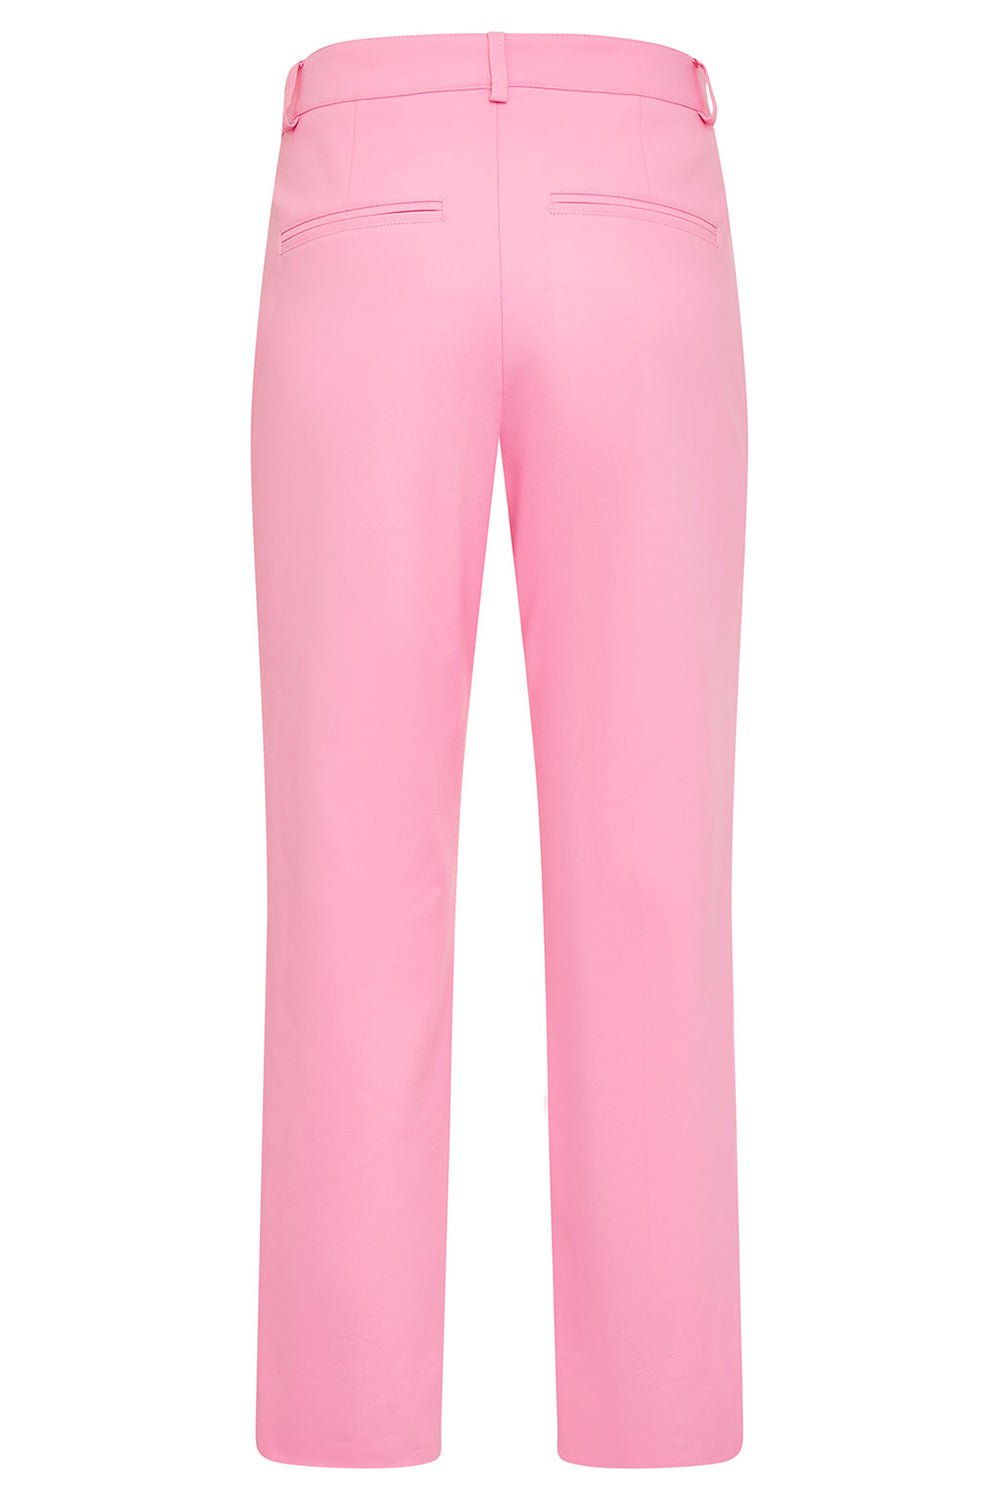 MAISON COMMON-Slim Cropped Pant - Pink-